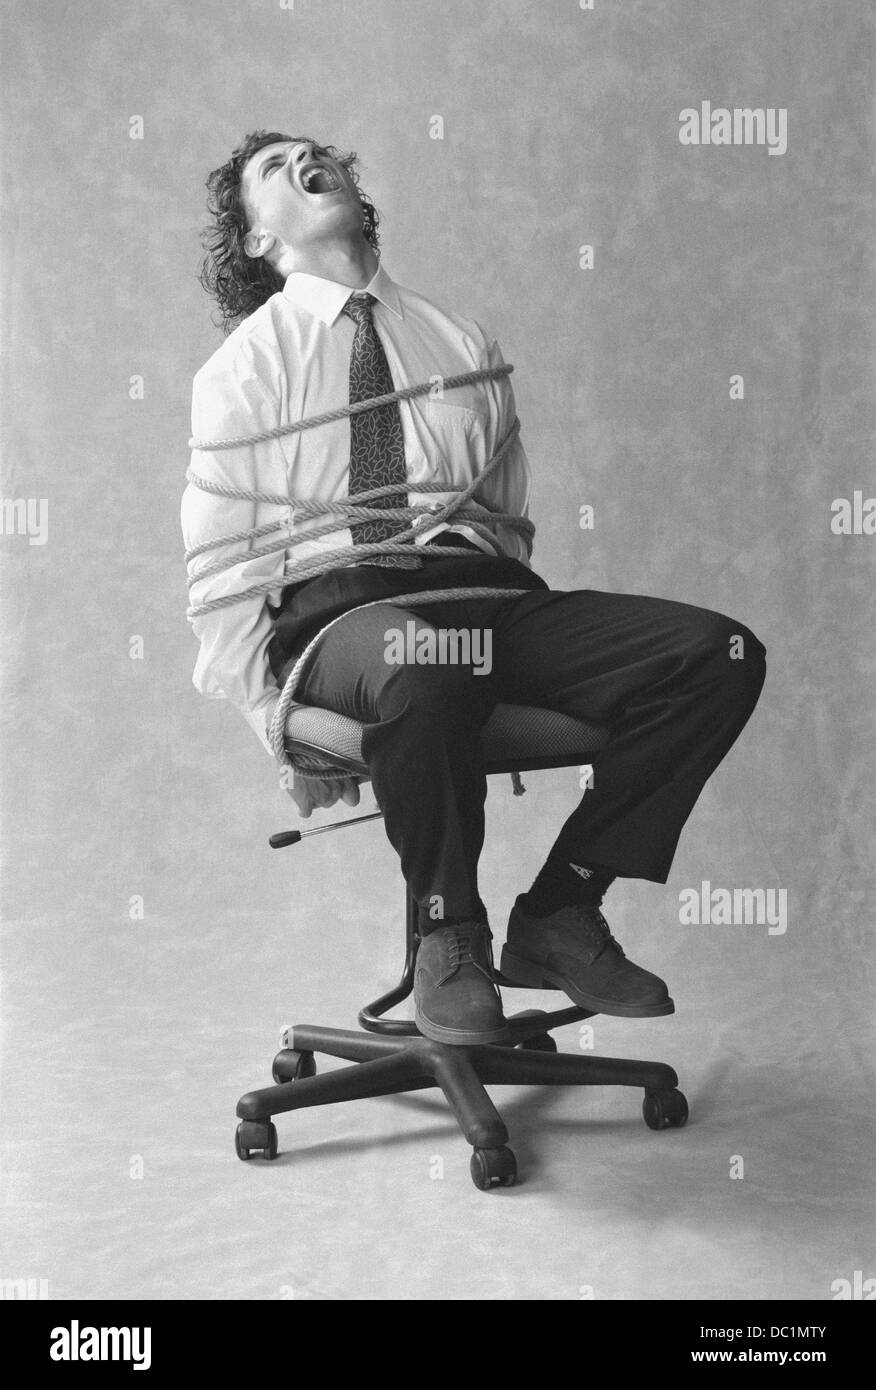 Man tied to chair Black and White Stock Photos & Images - Alamy